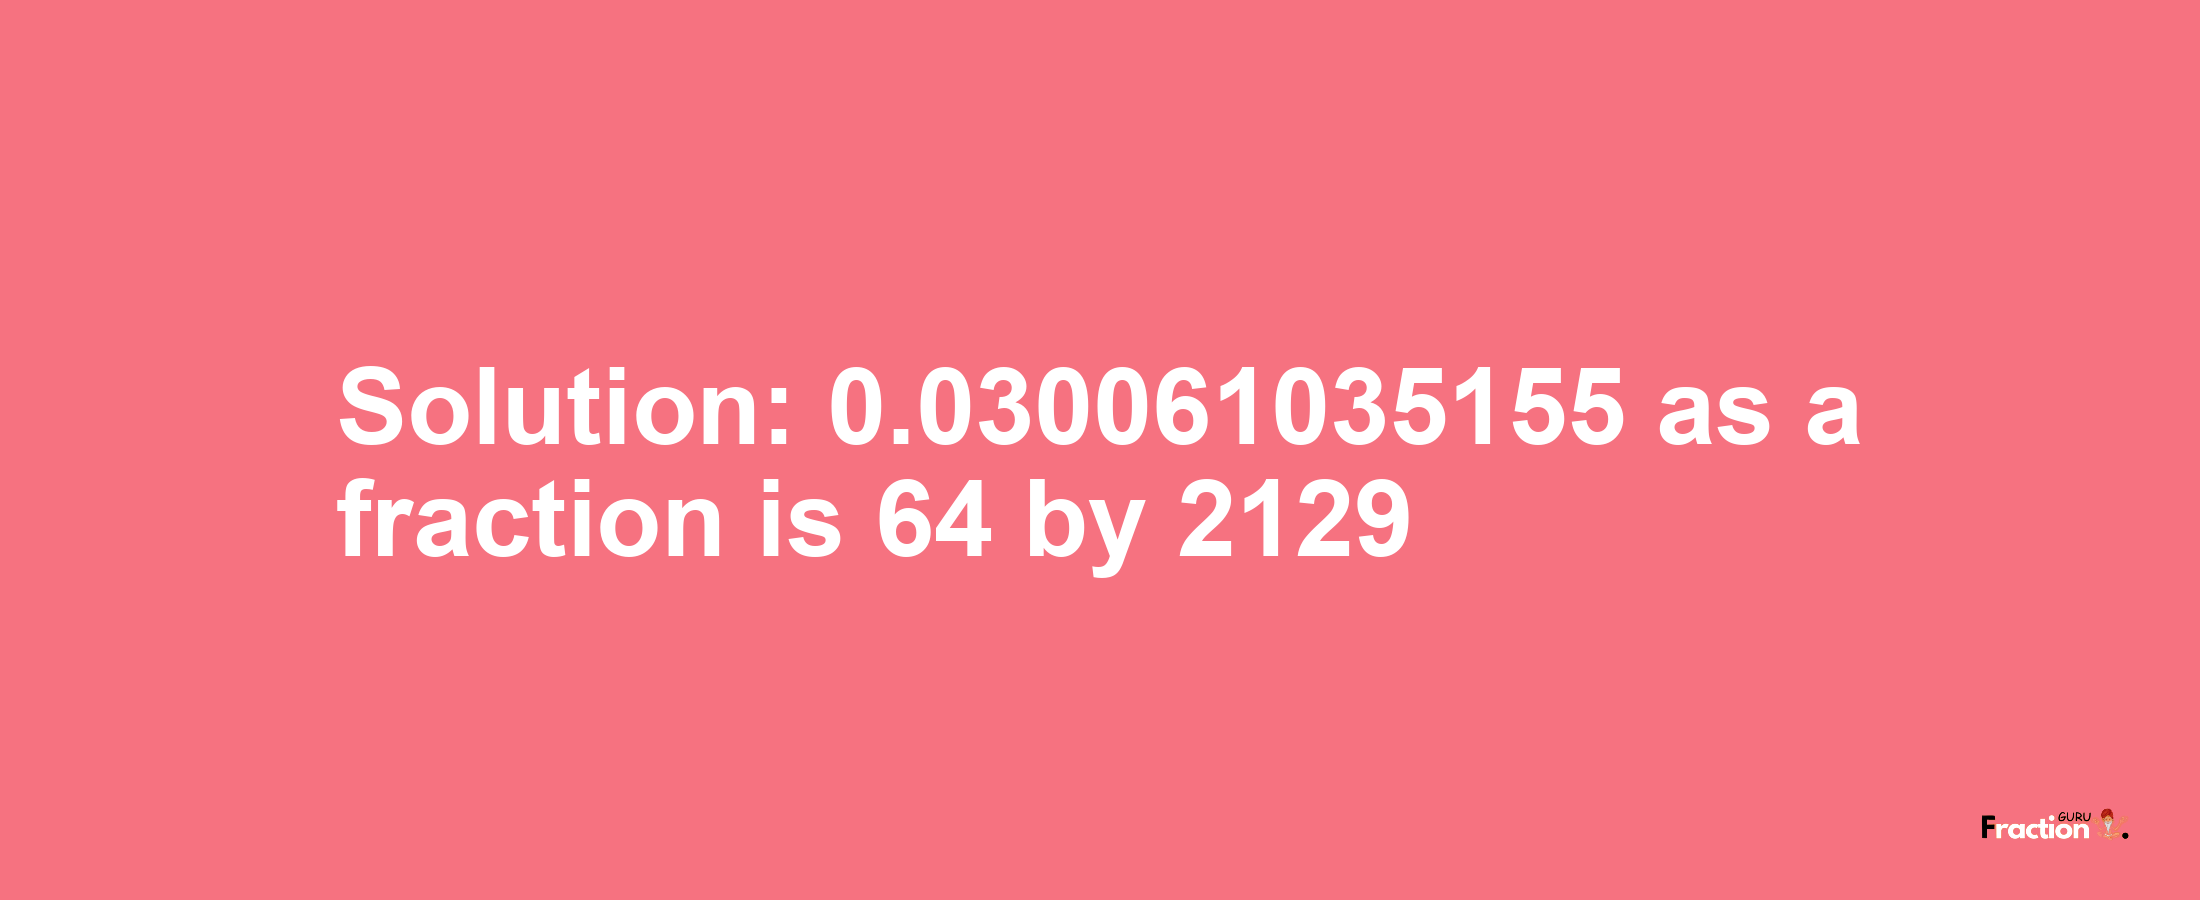 Solution:0.030061035155 as a fraction is 64/2129